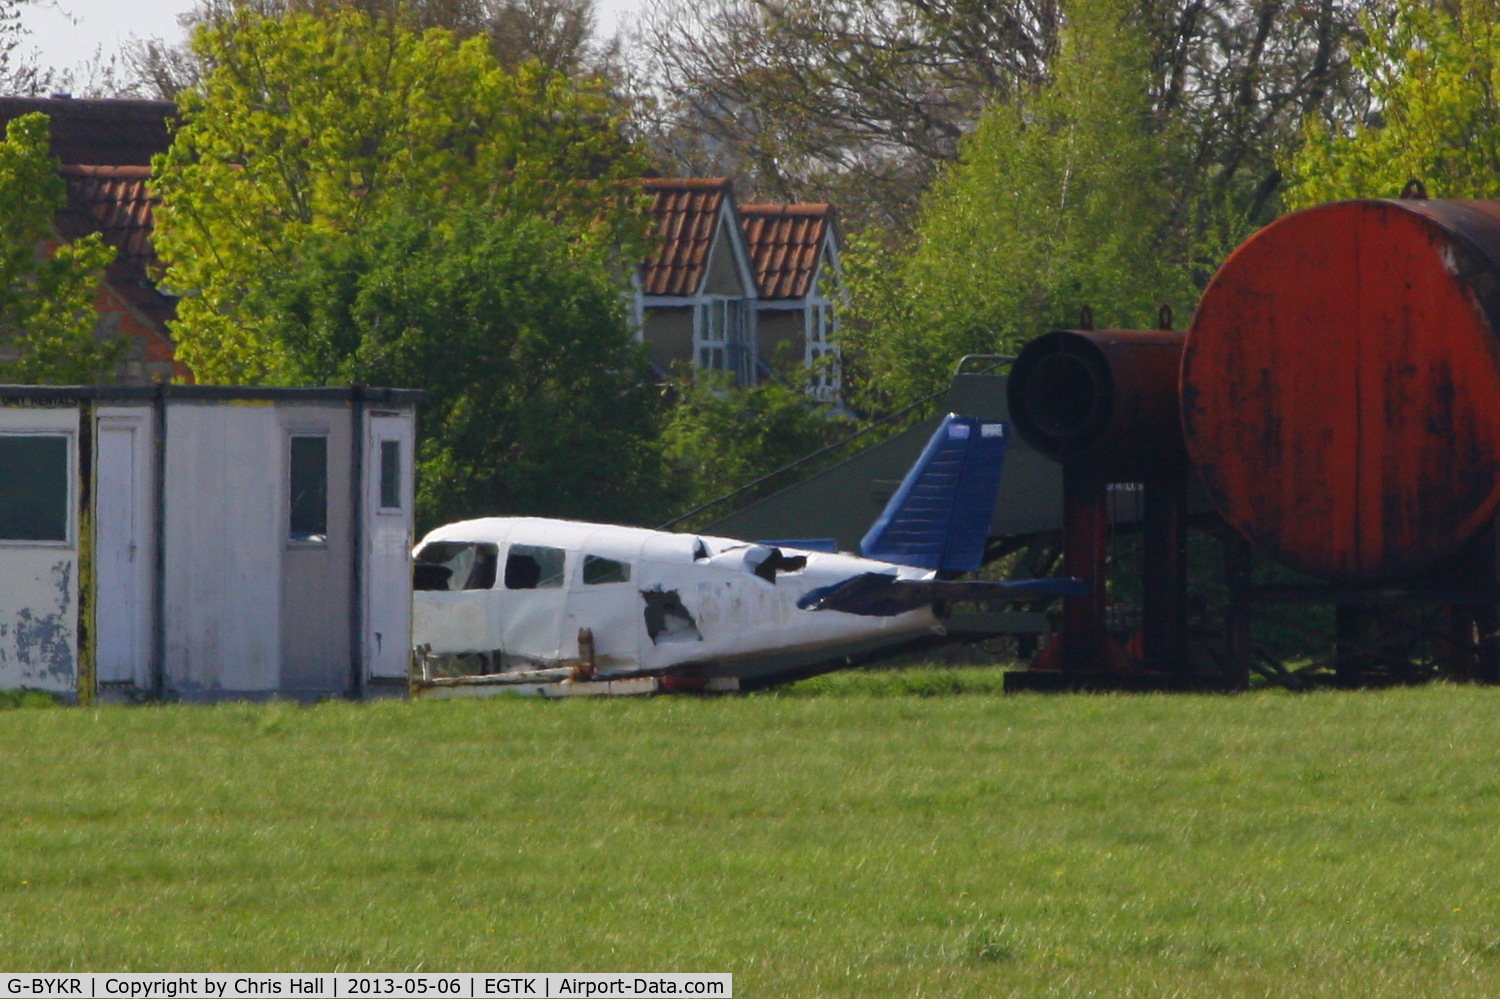 G-BYKR, 1988 Piper PA-28-161 Warrior III C/N 2816061, on the fire dump at Oxford Airport, written off when it crashed following an engine failure on take off from Oxford 30th August 2006